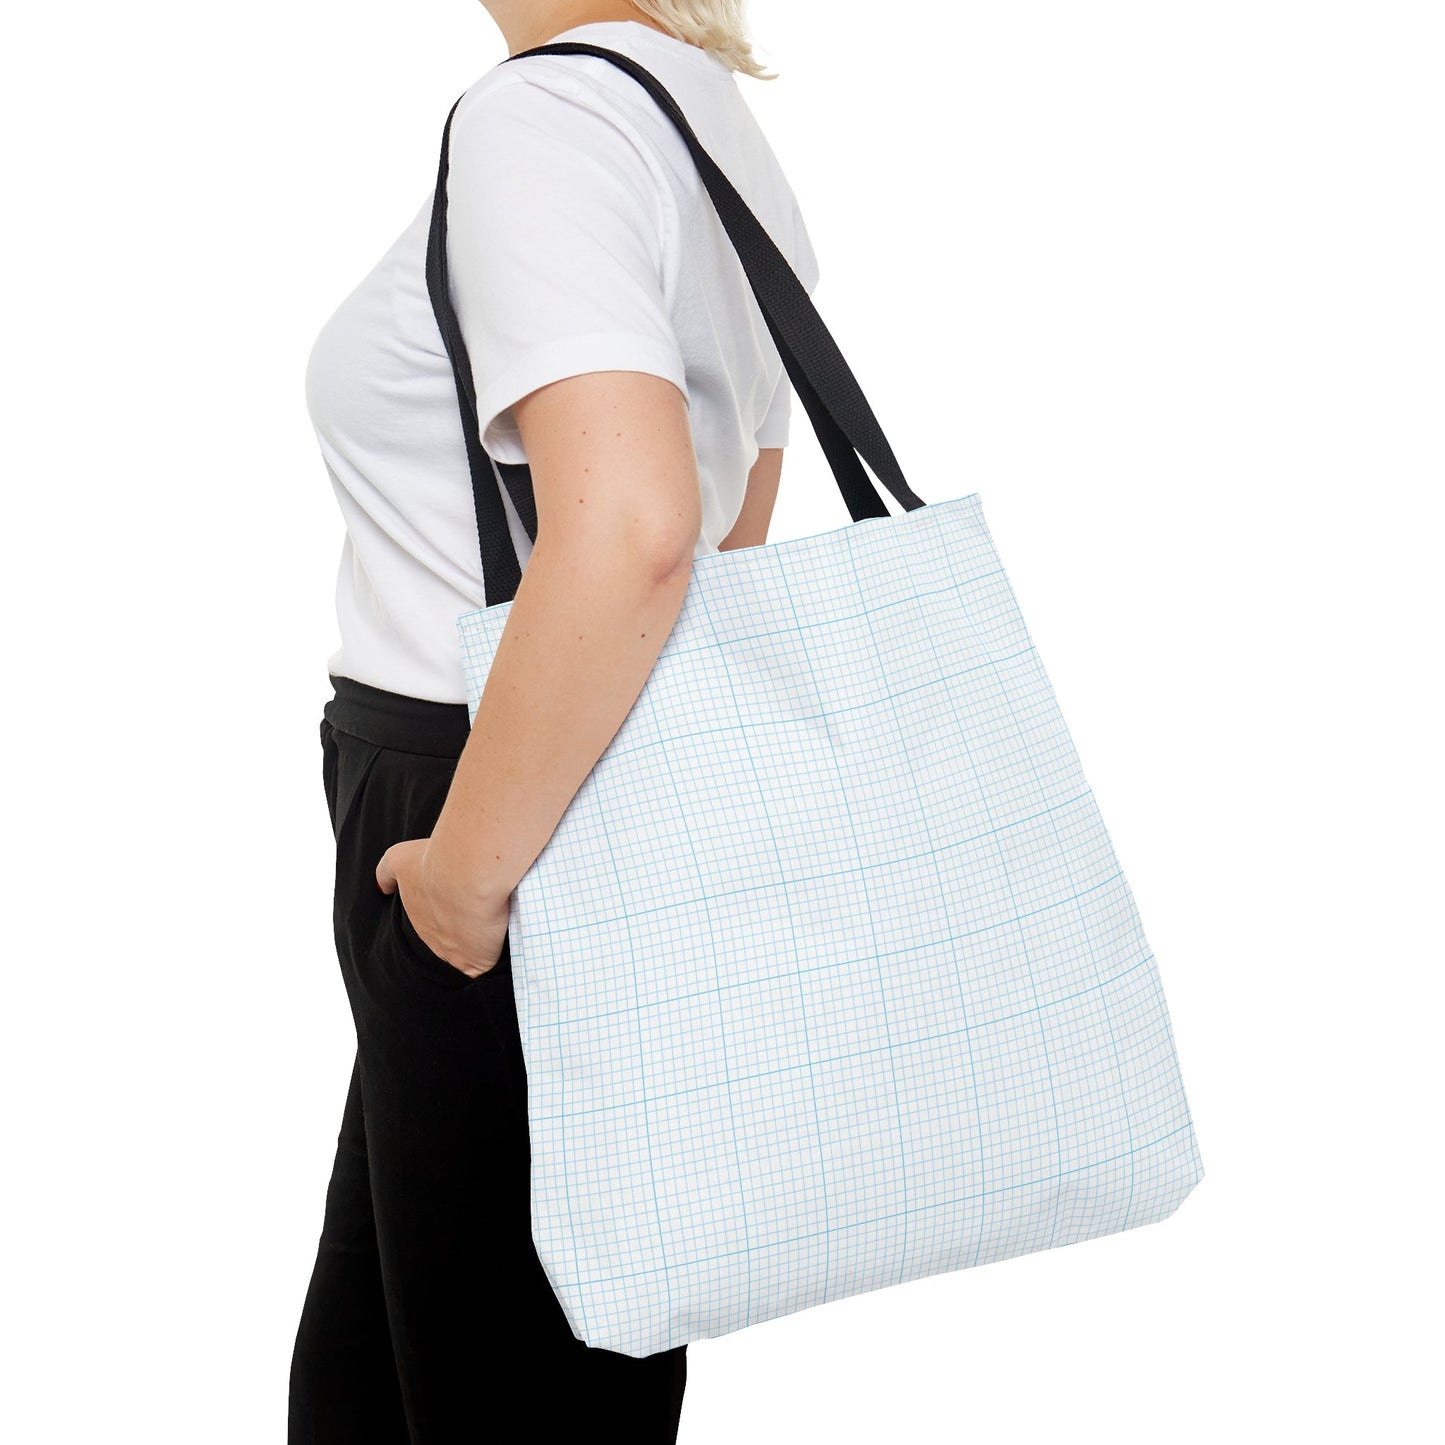 Lettered Blue Graph Tote